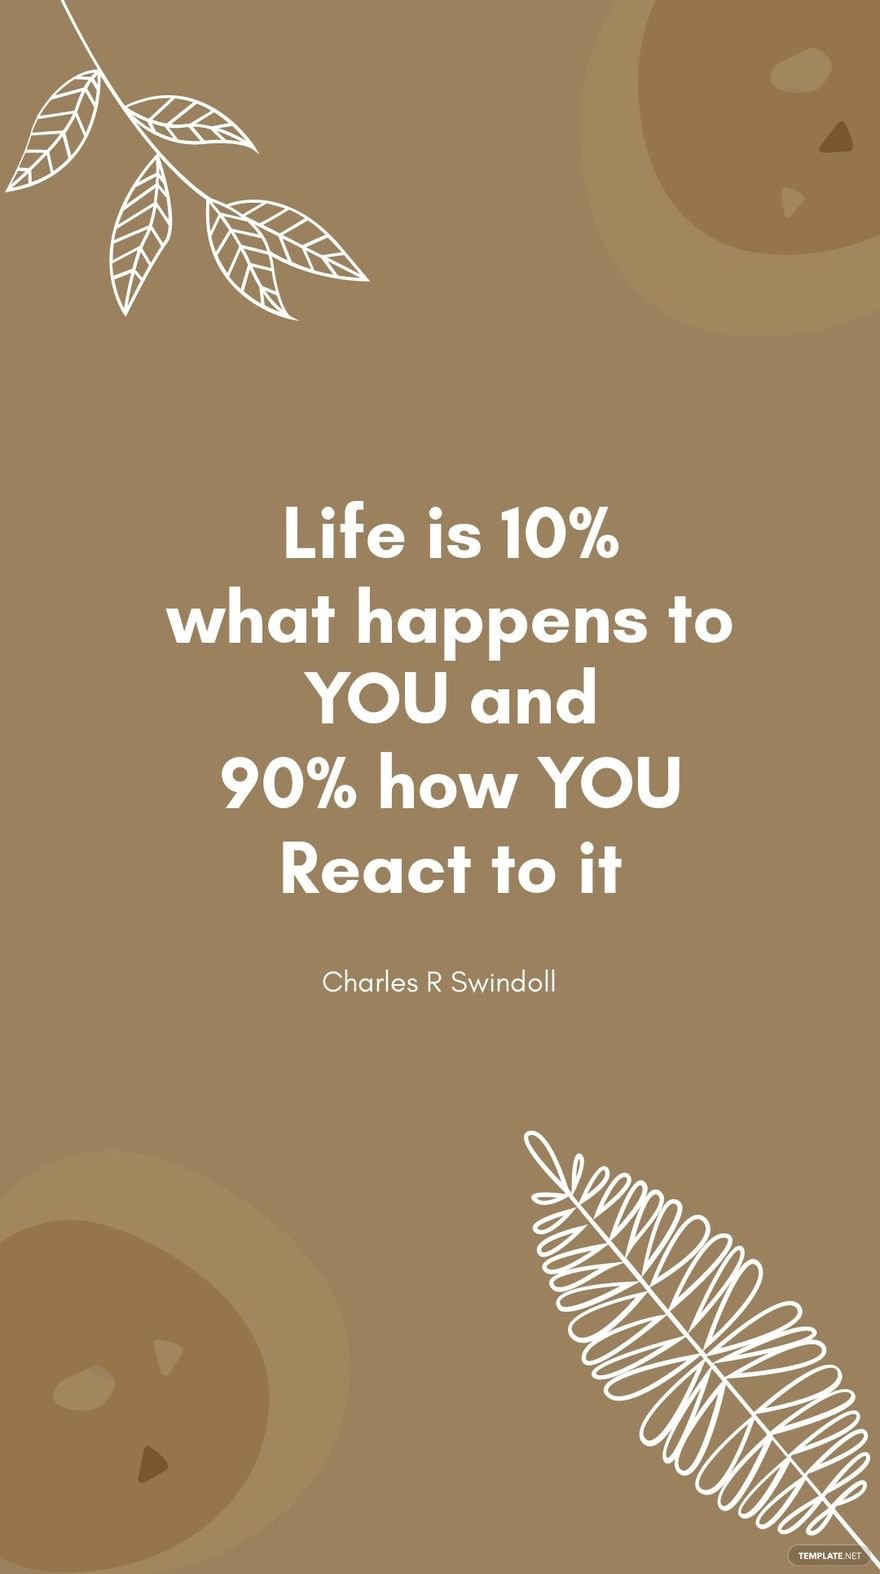 Charles R Swindoll - Life is 10% what happens to you and 90% how you react to it